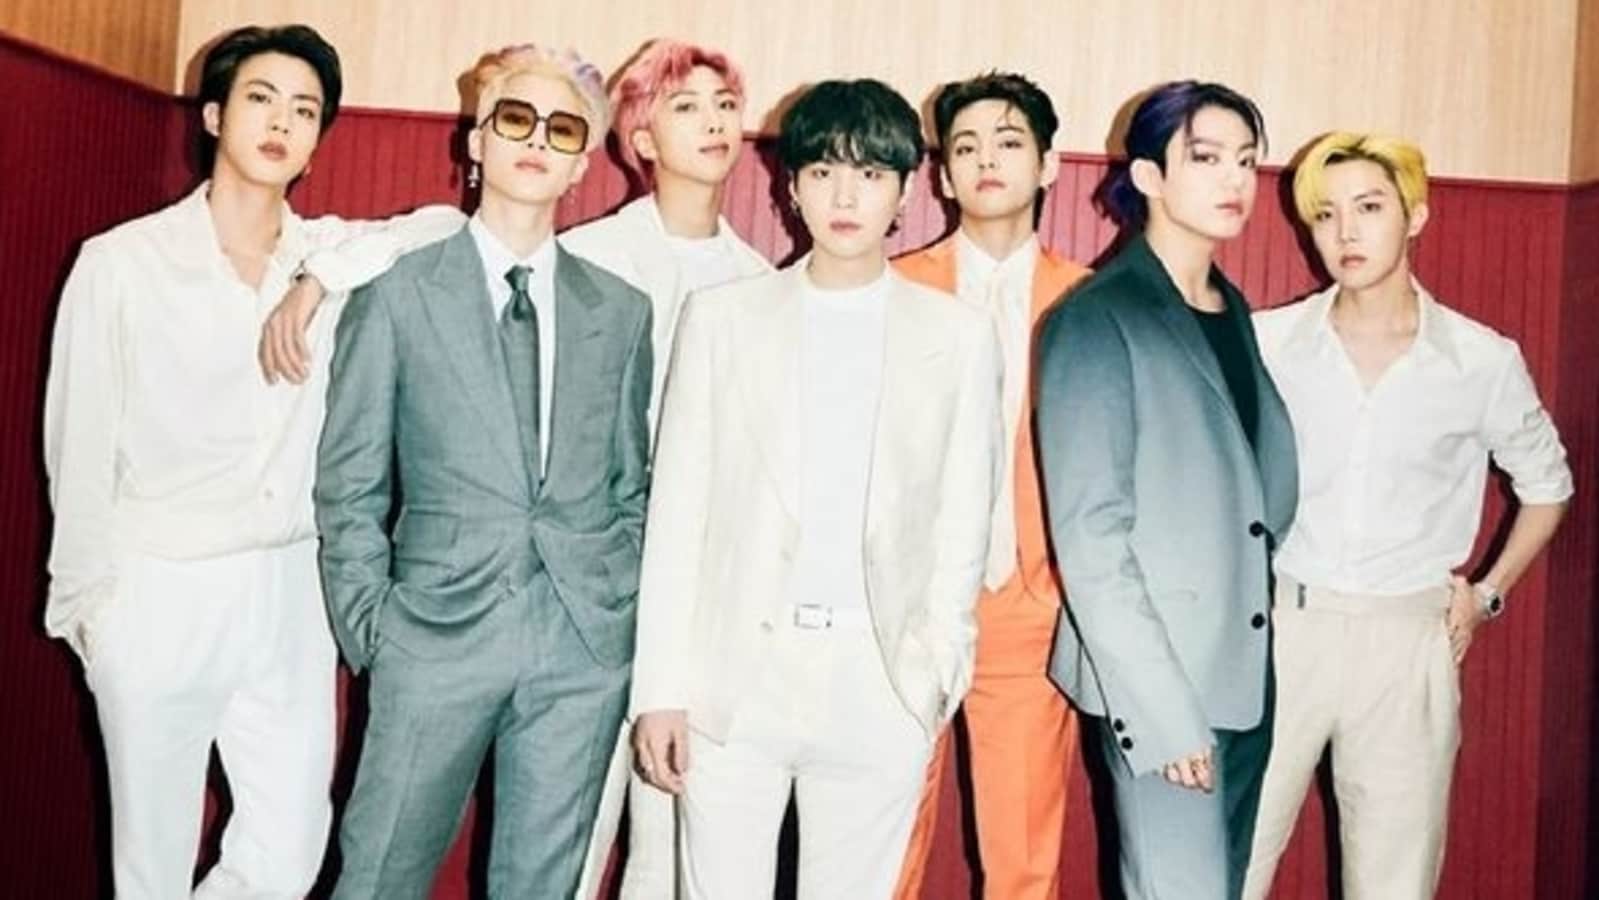 BTS Butter concept photo: 'Pink Joon' returns, Jimin's rainbow hair and Jungkook's purple ponytail win fans over